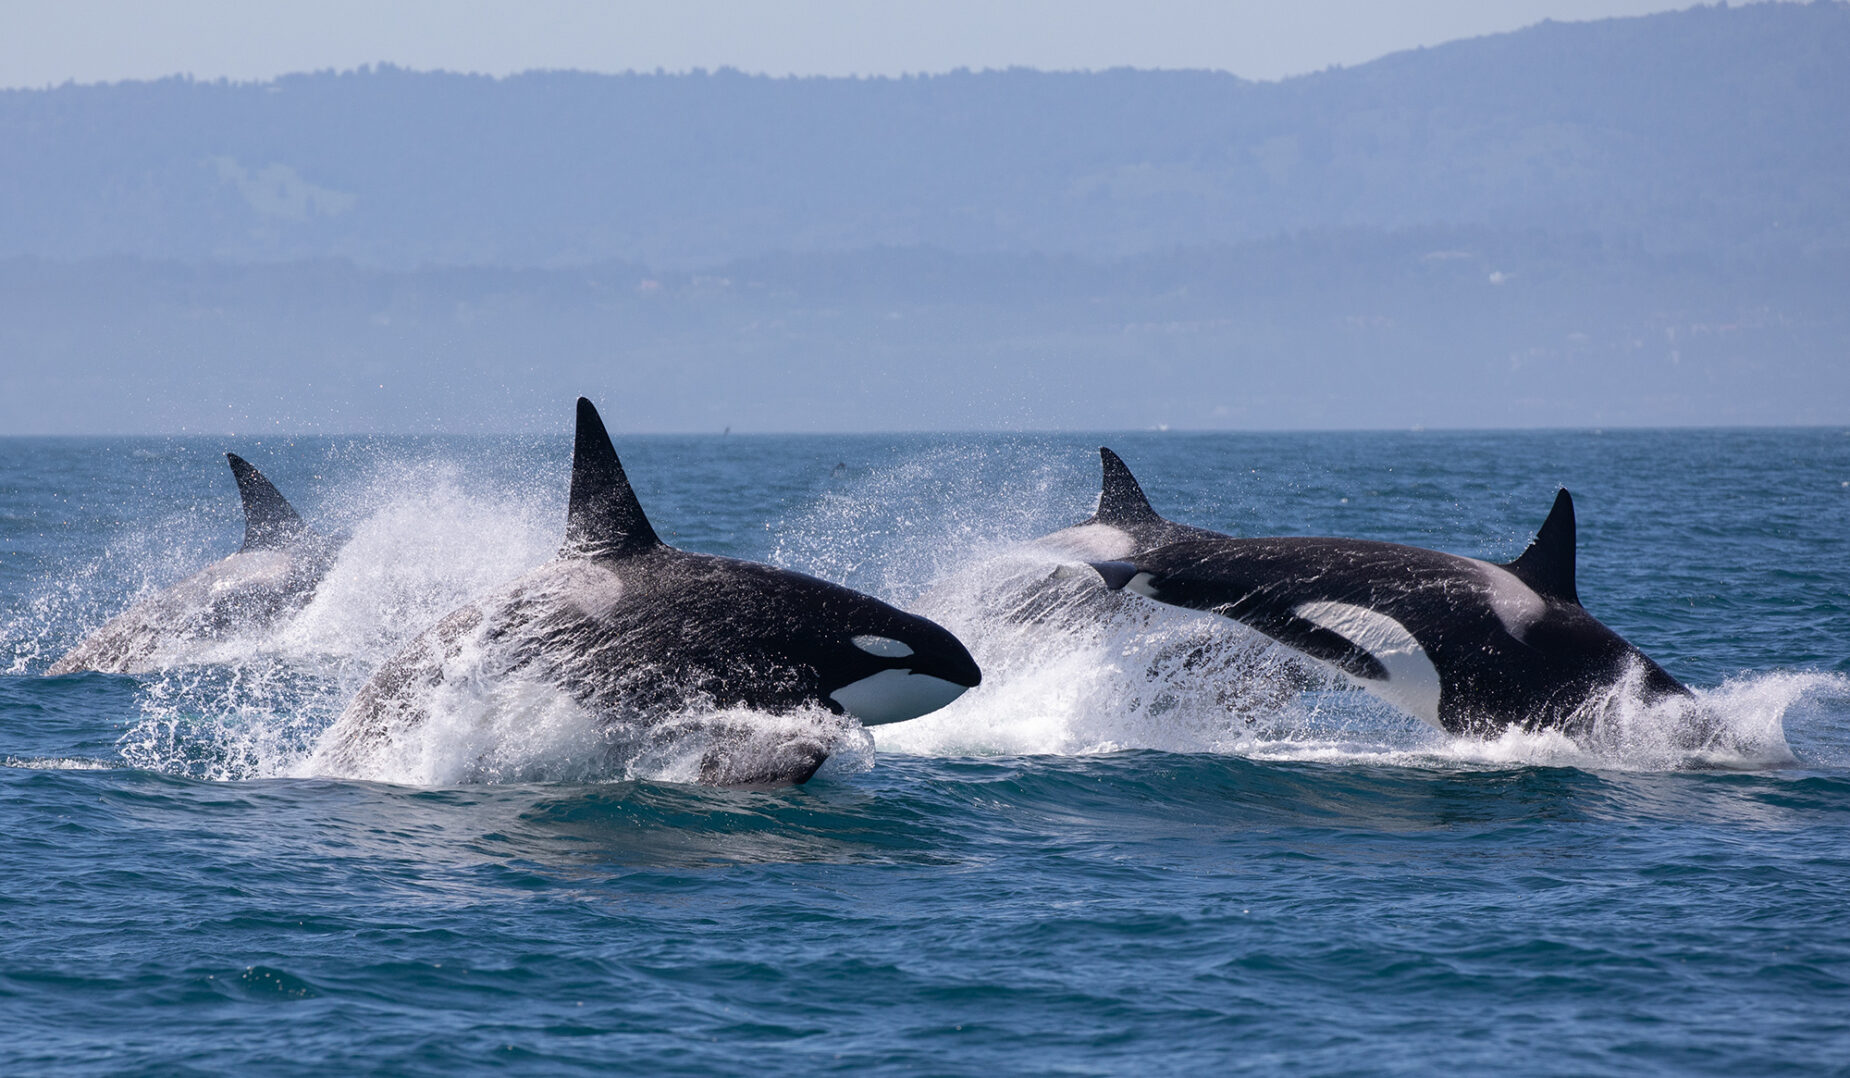 Wave Warriors is working to save the Southern Resident Orca